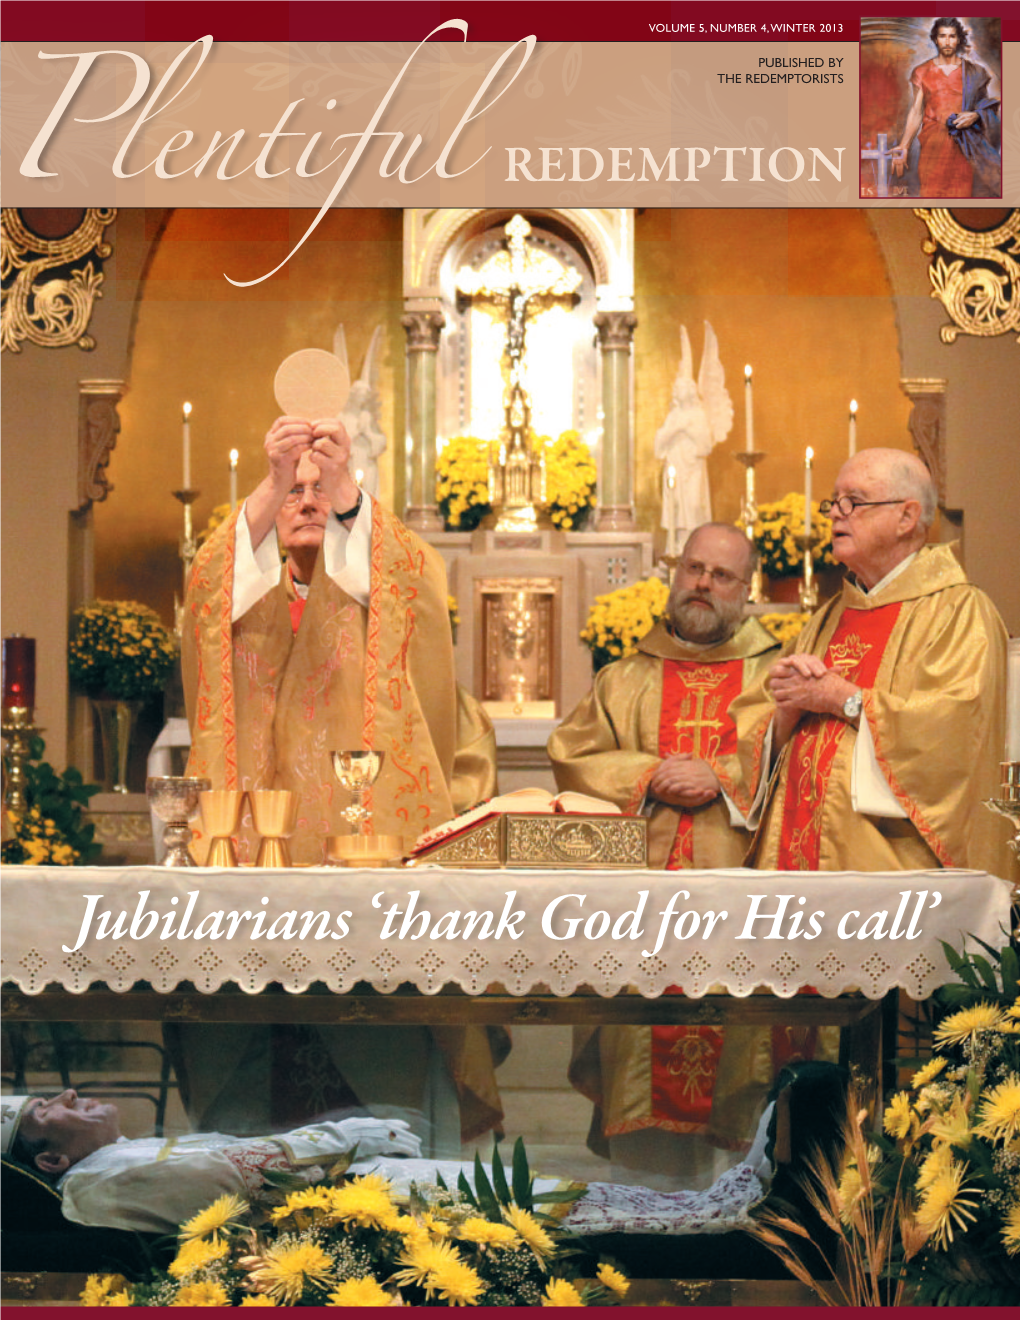 Jubilarians 'Thank God for His Call'